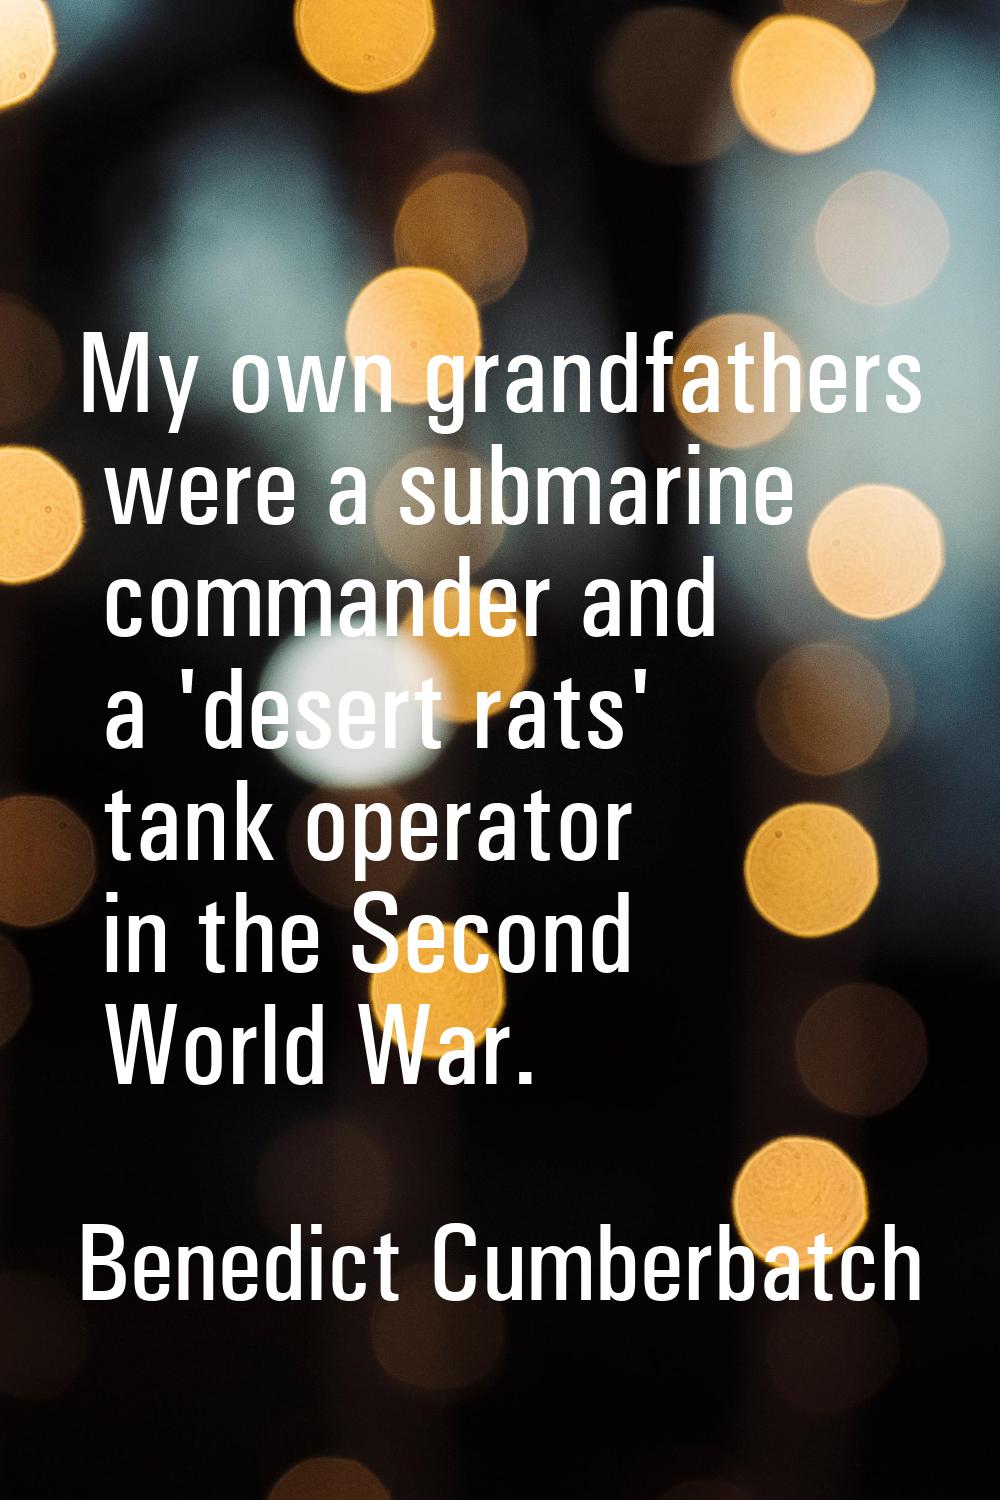 My own grandfathers were a submarine commander and a 'desert rats' tank operator in the Second Worl